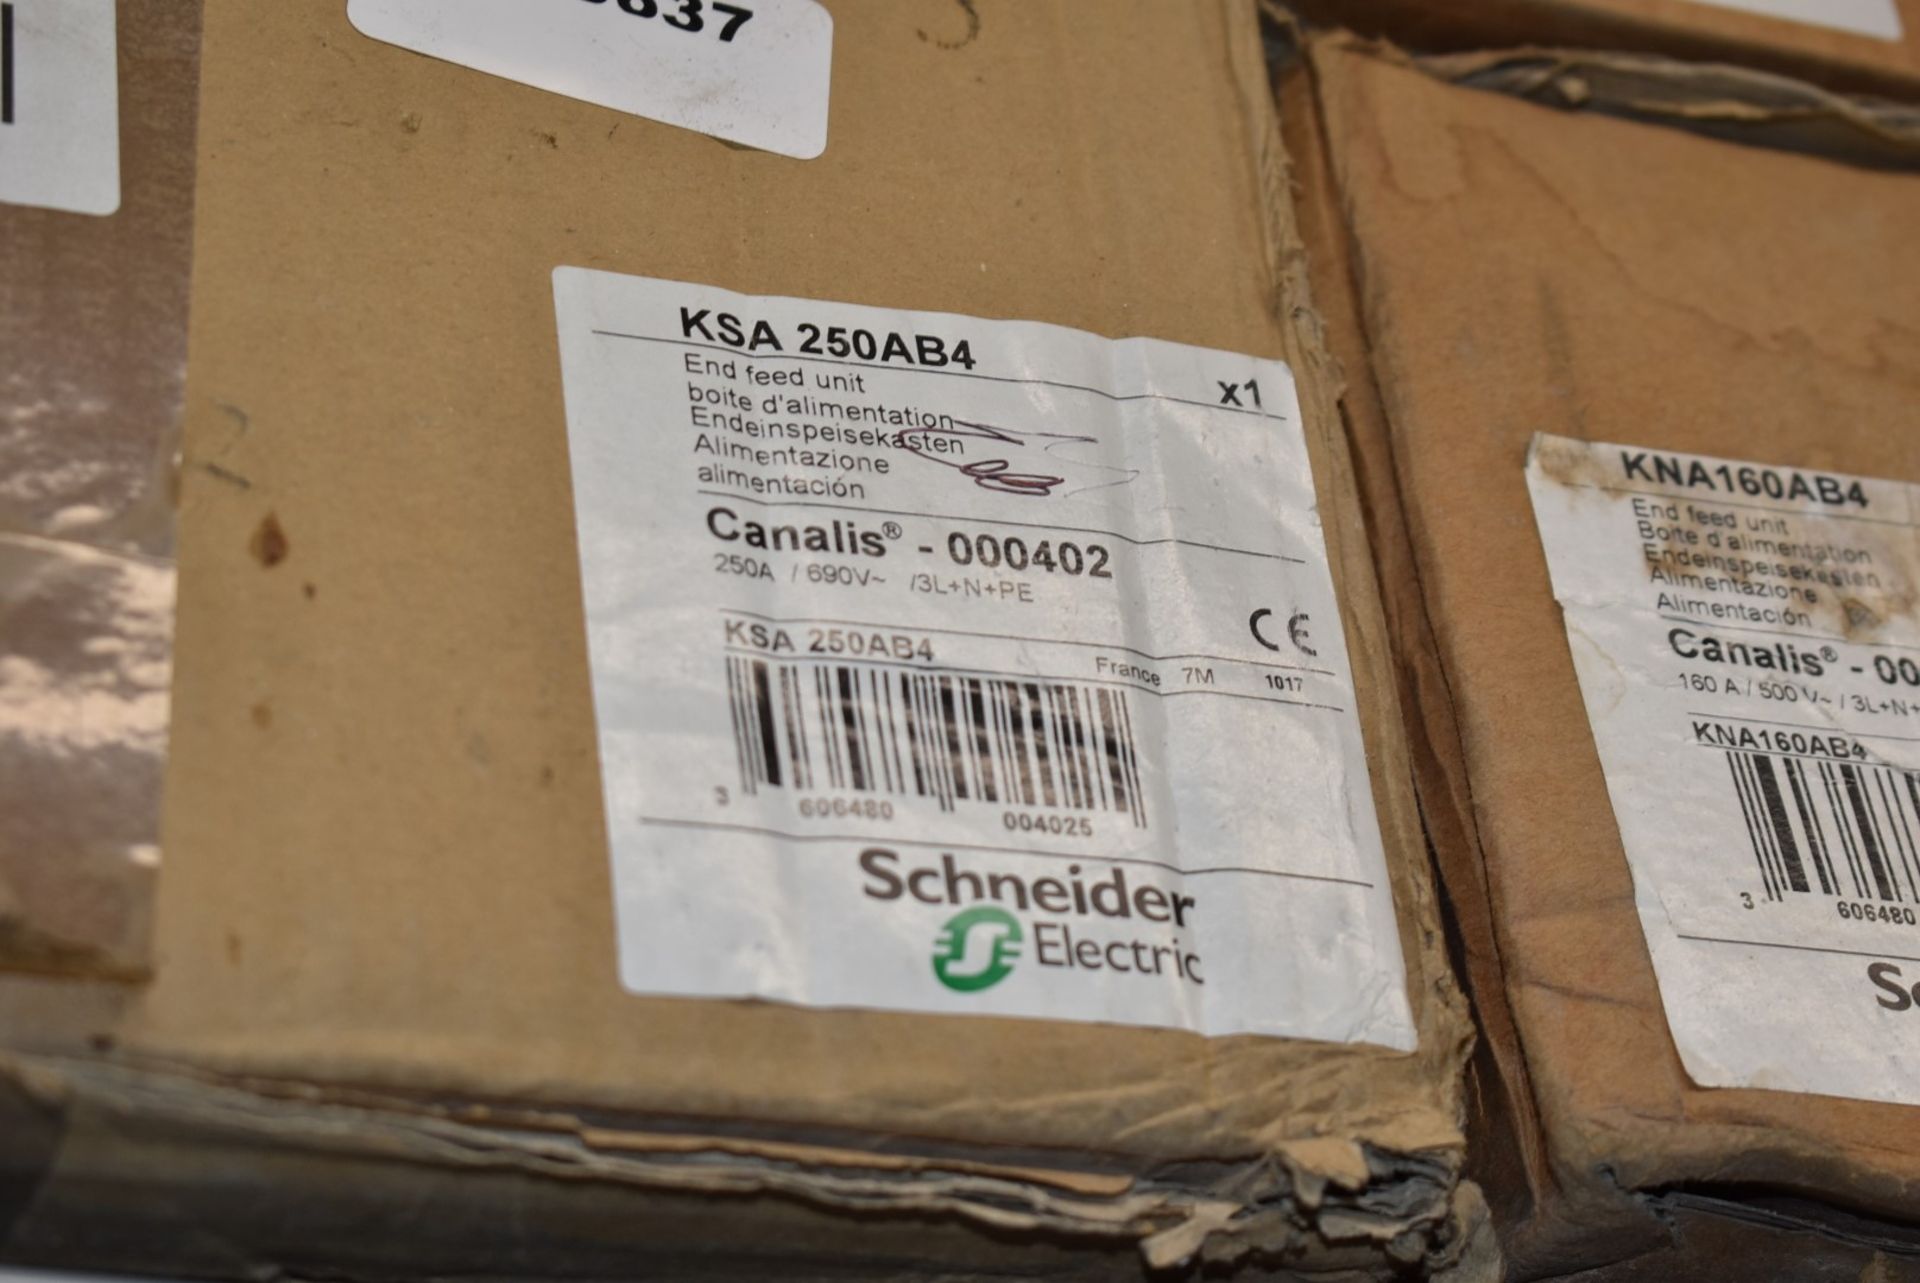 3 x Schneider Electric Canalis End Feed Units - Types KSA250AB4 & KNA160AB4 - RRP £1,360 - Image 3 of 7